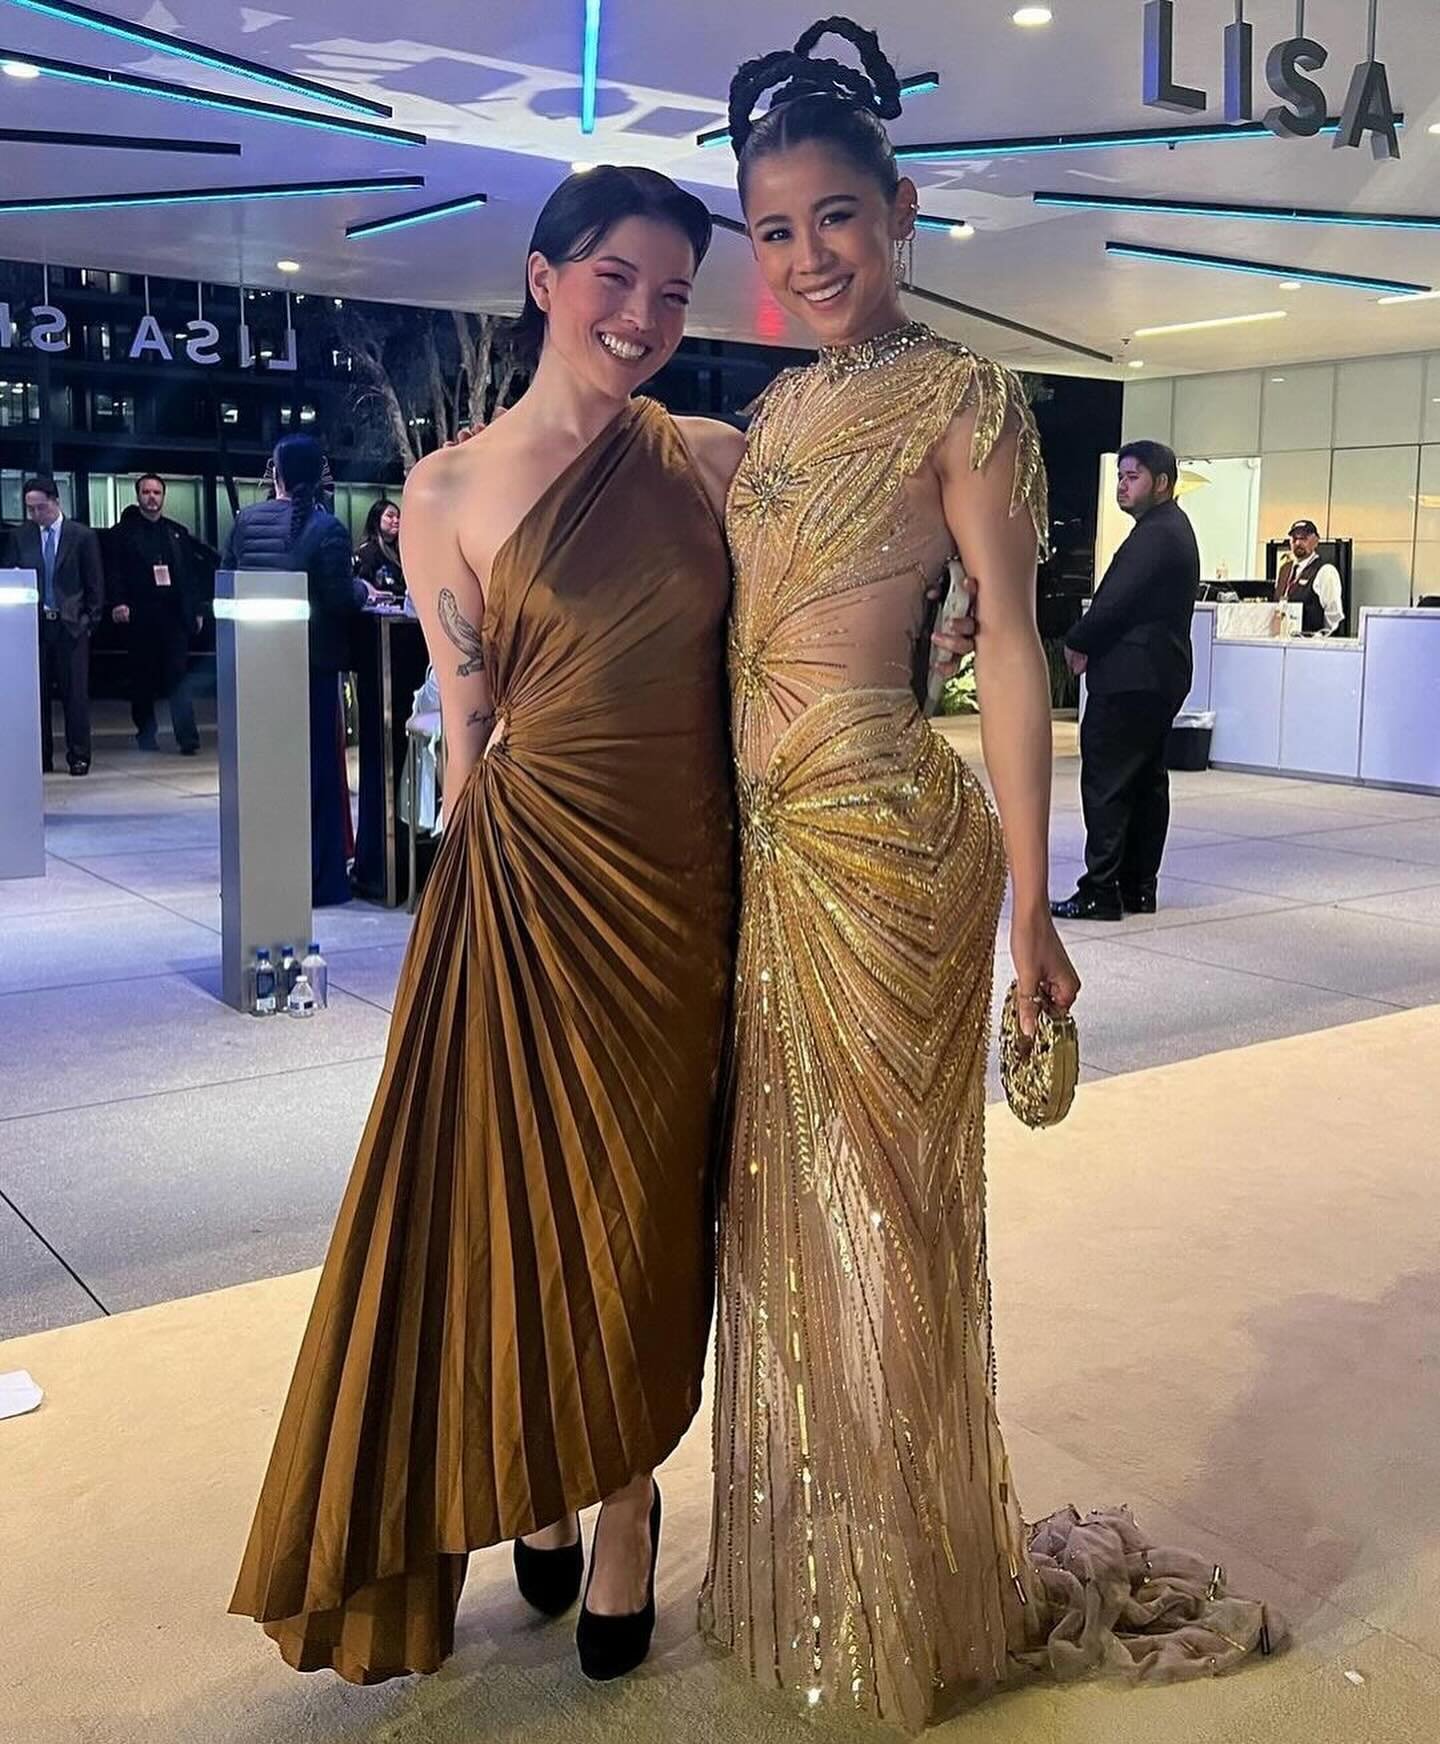 ✨Honoree @leahmlewis looked absolutely radiant at the @goldhouseco gala, accessorizing with the breathtaking Simurgh &amp; Hummingbirds Ushape Mini from @blumera_official styled to perfection by @anatanaka. ✨

#blumera #leahlewis #anatanaka #goldhous